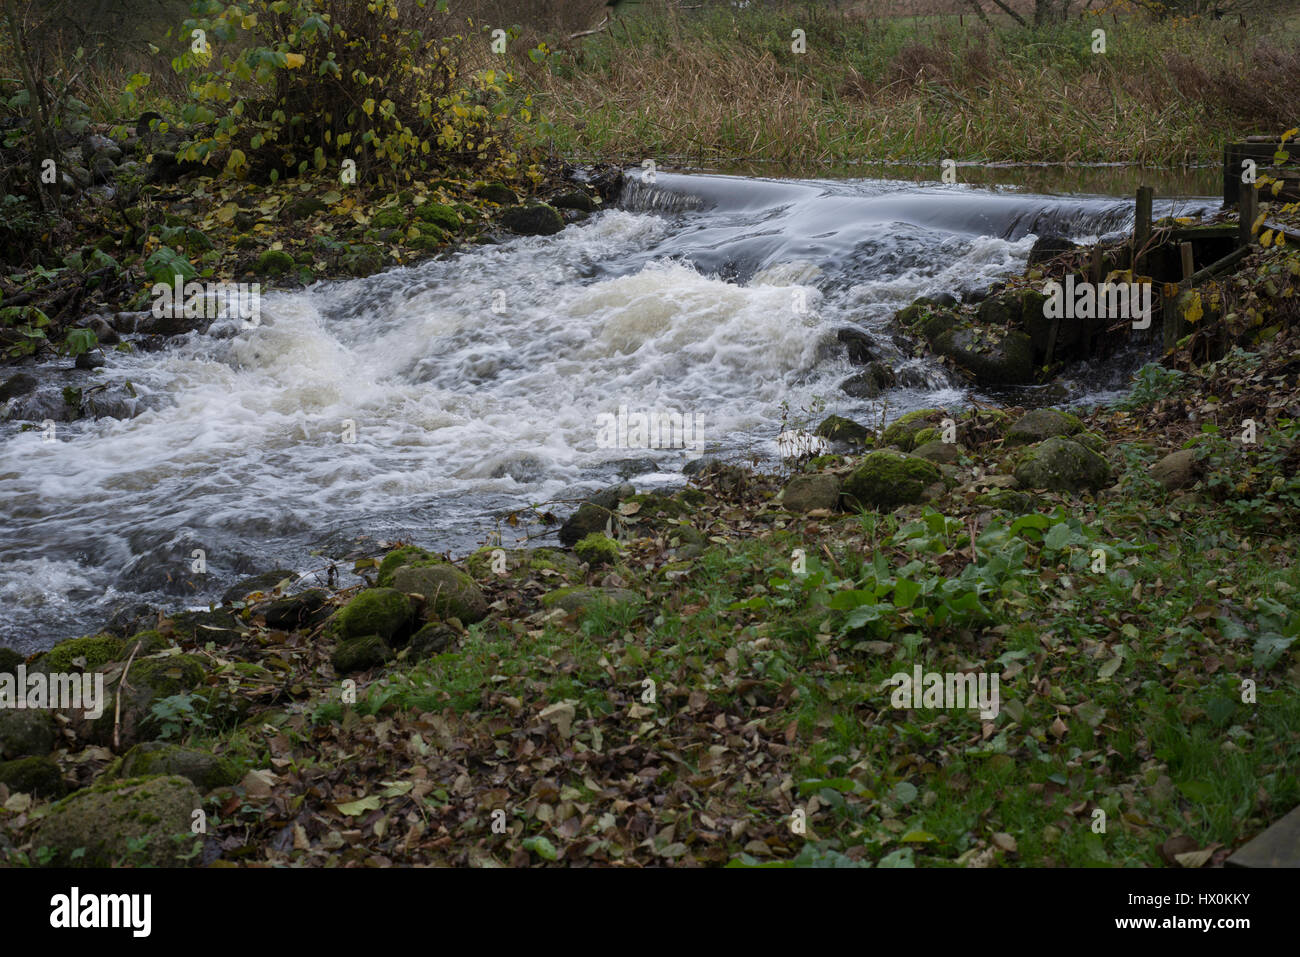 Salmon ladder for sea trout in river Nybroån, Sweden Stock Photo